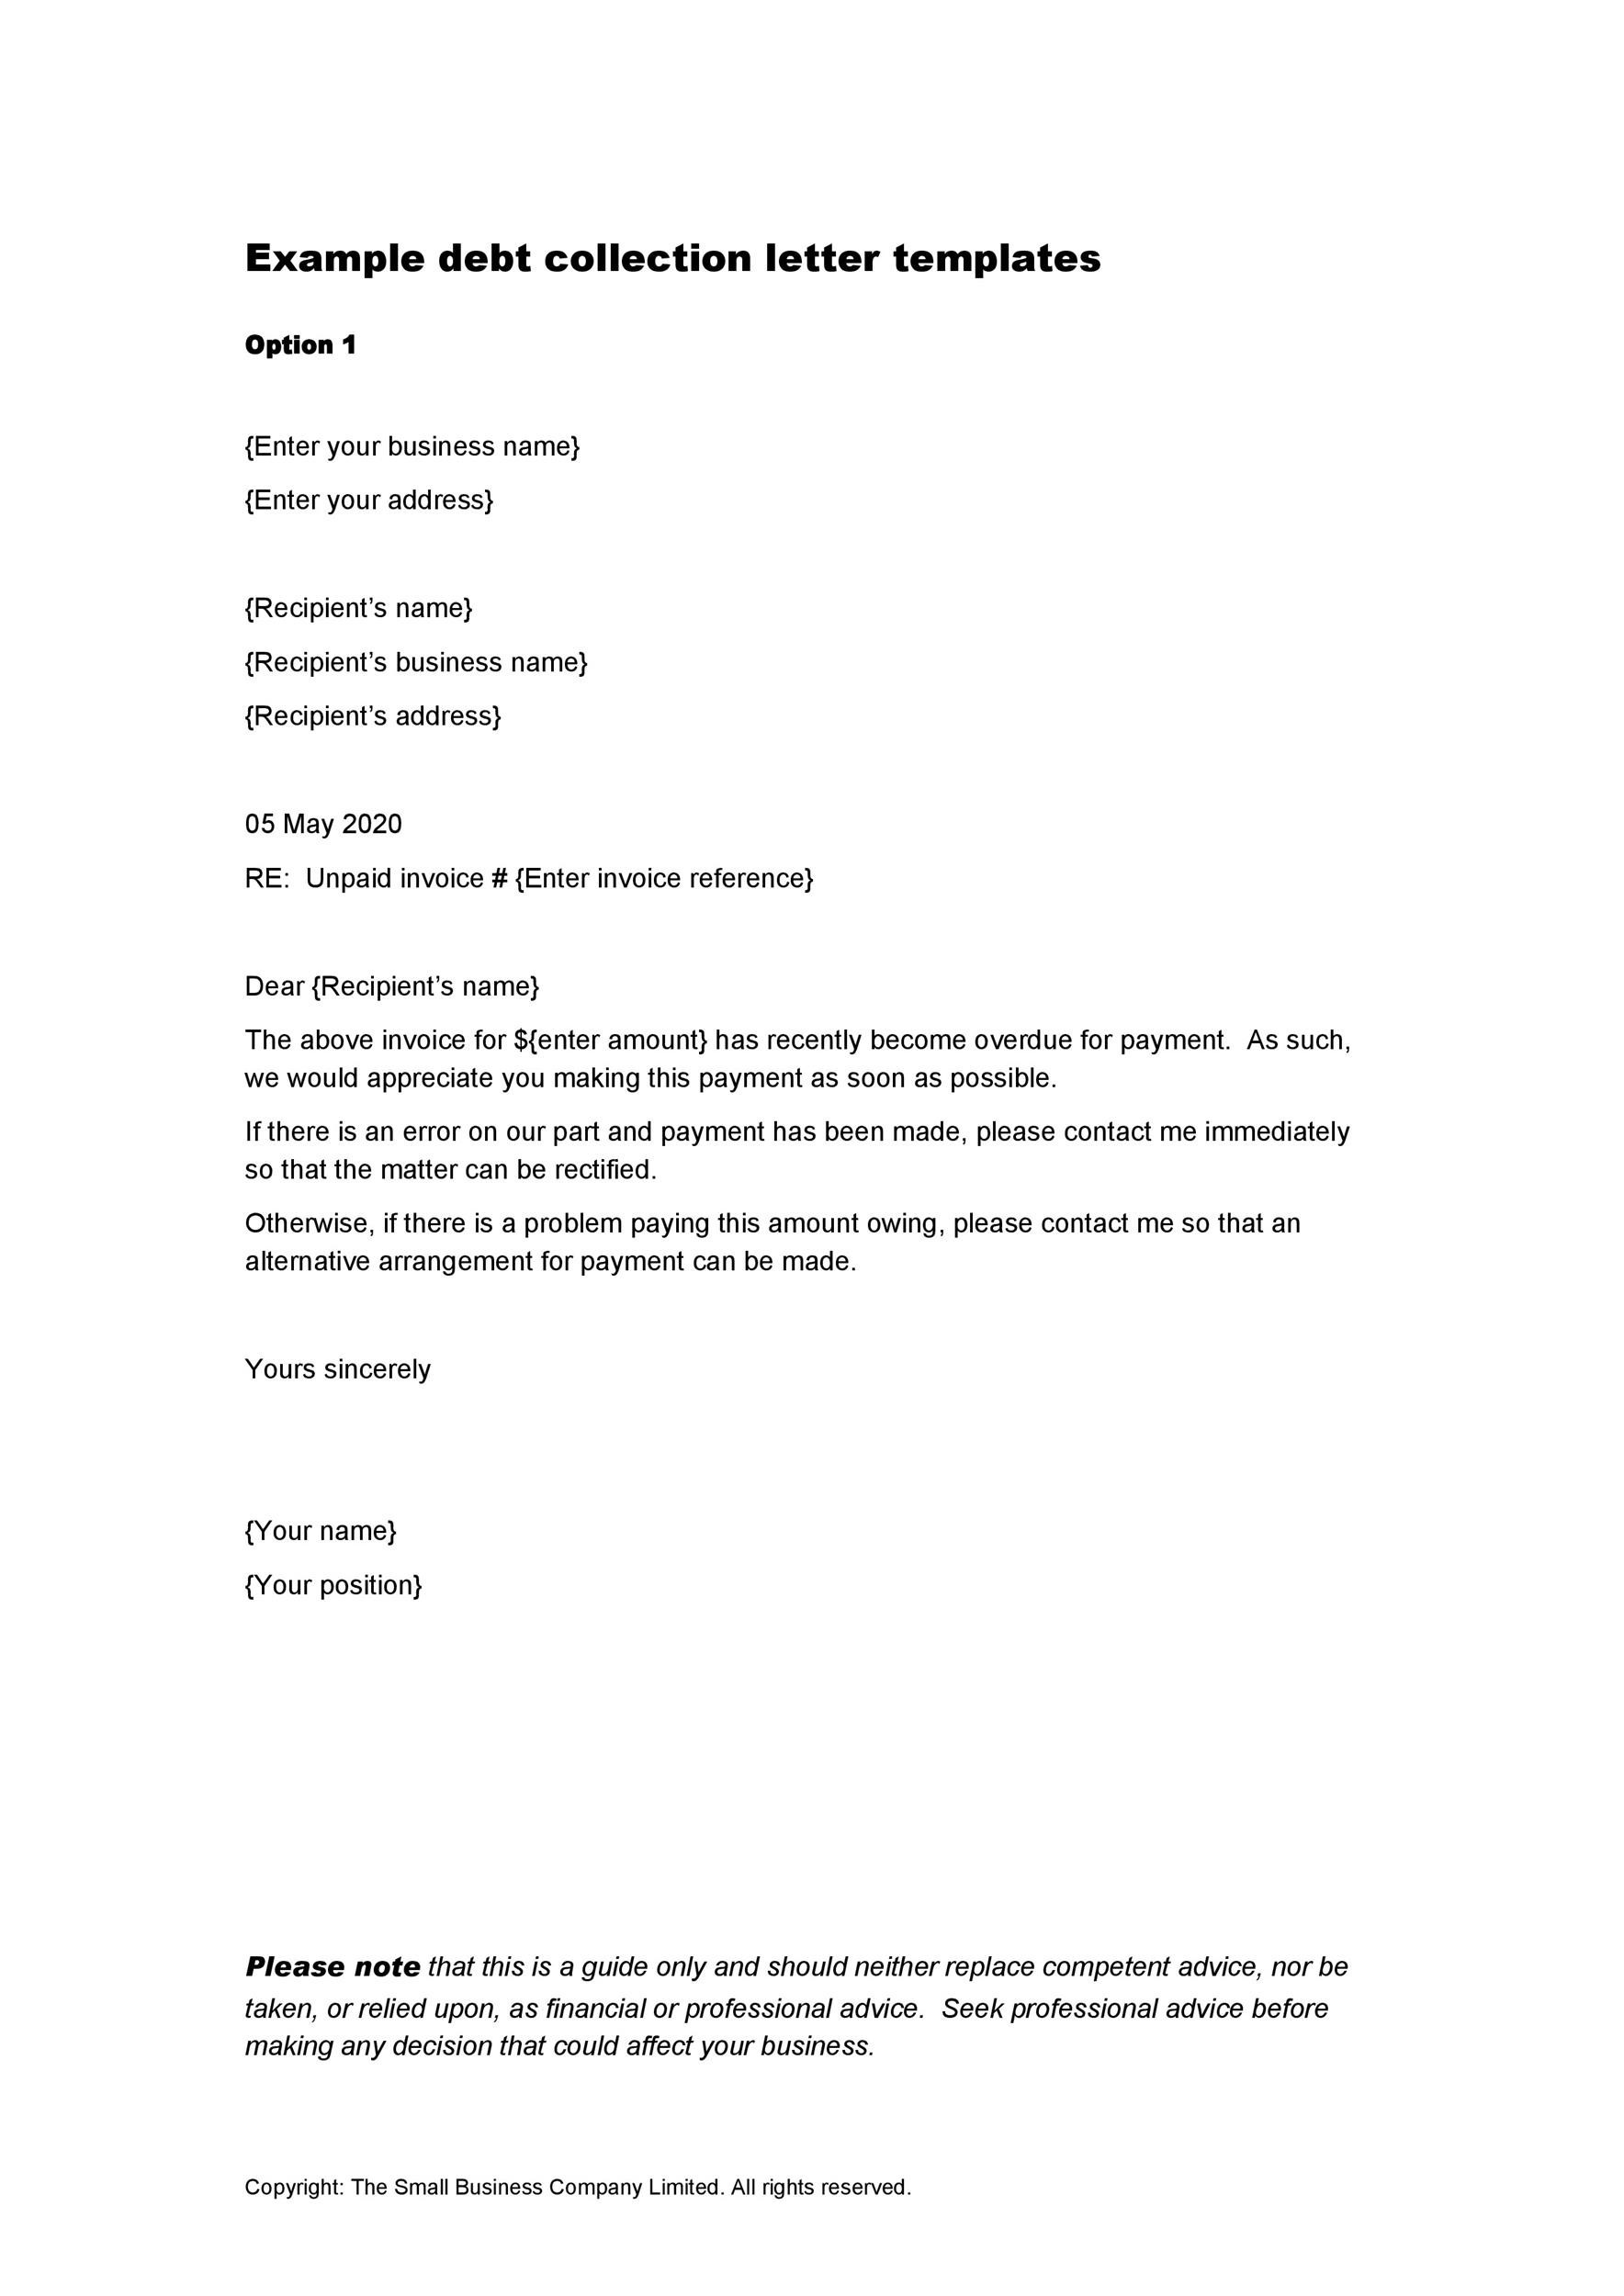 44 Effective Collection Letter Templates Samples TemplateLab